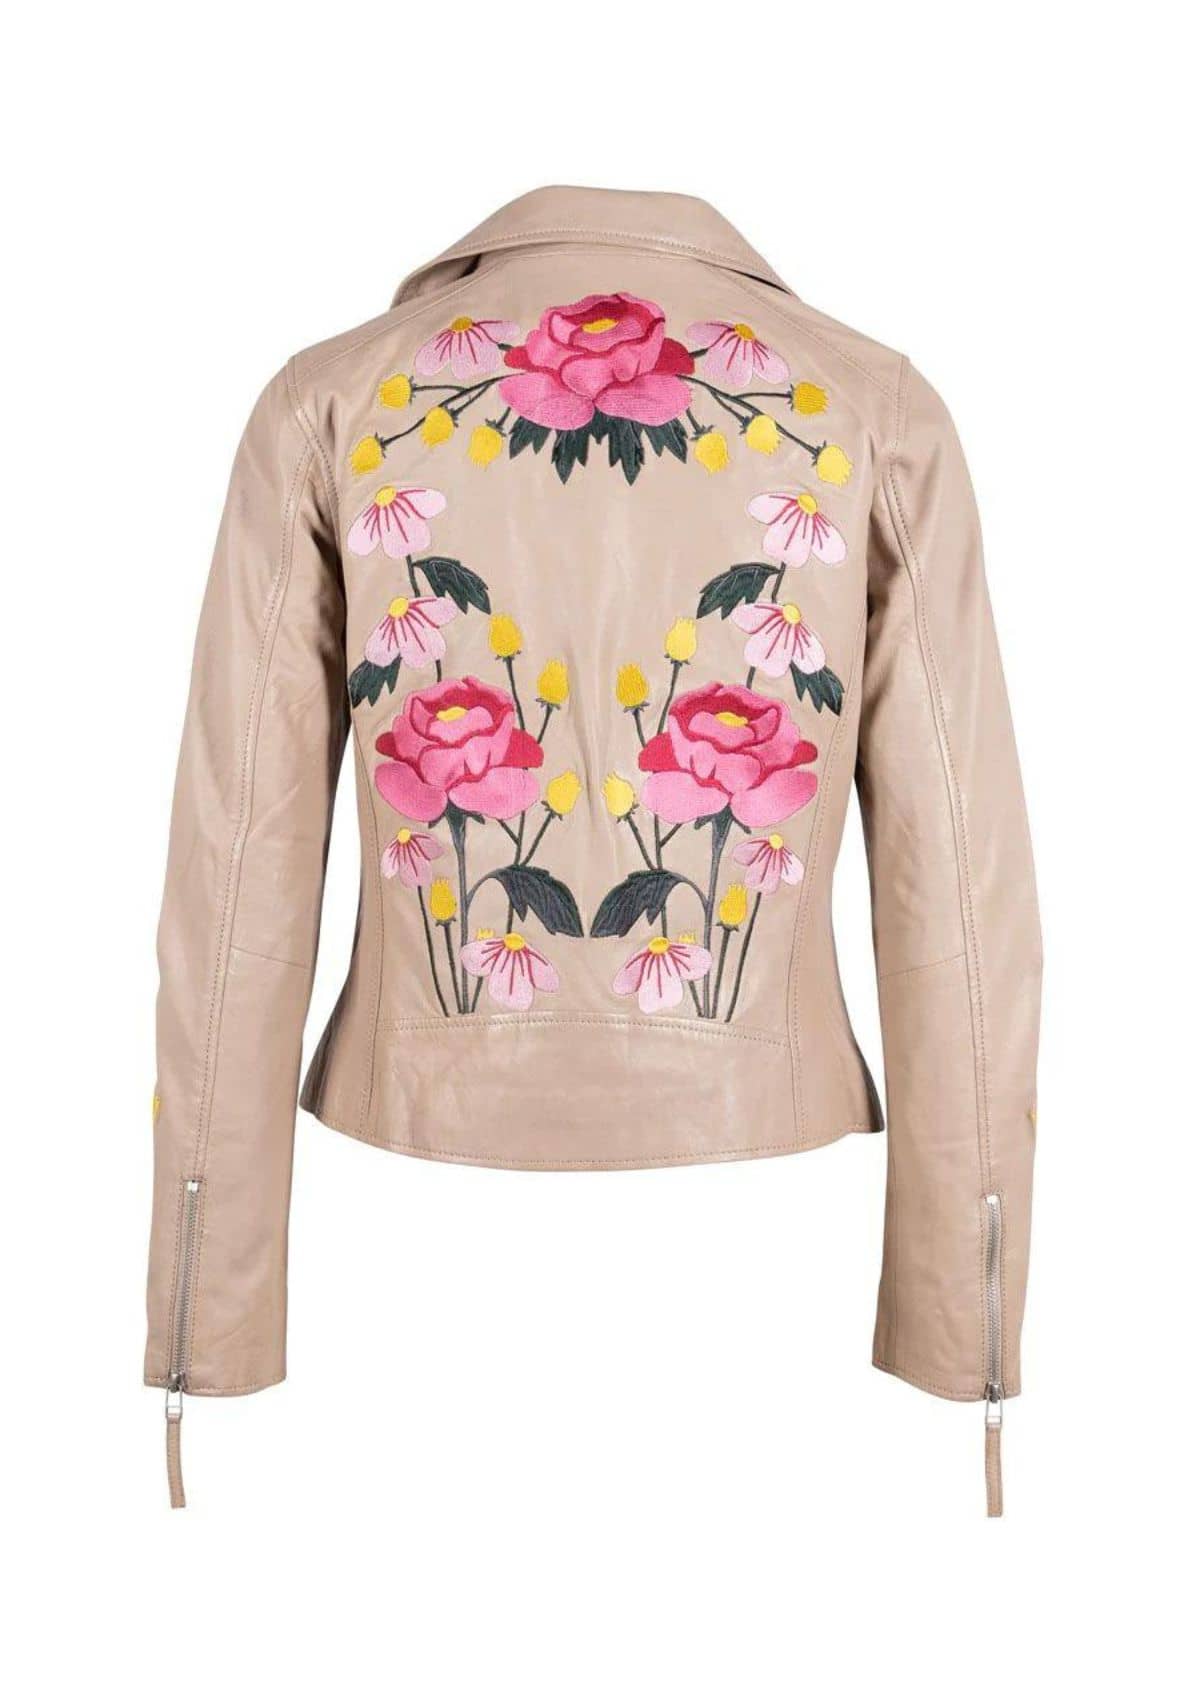 Peonie Floral Leather Jacket - Light Beige -Mauritius GmbH Int. Fashion- Ruby Jane-